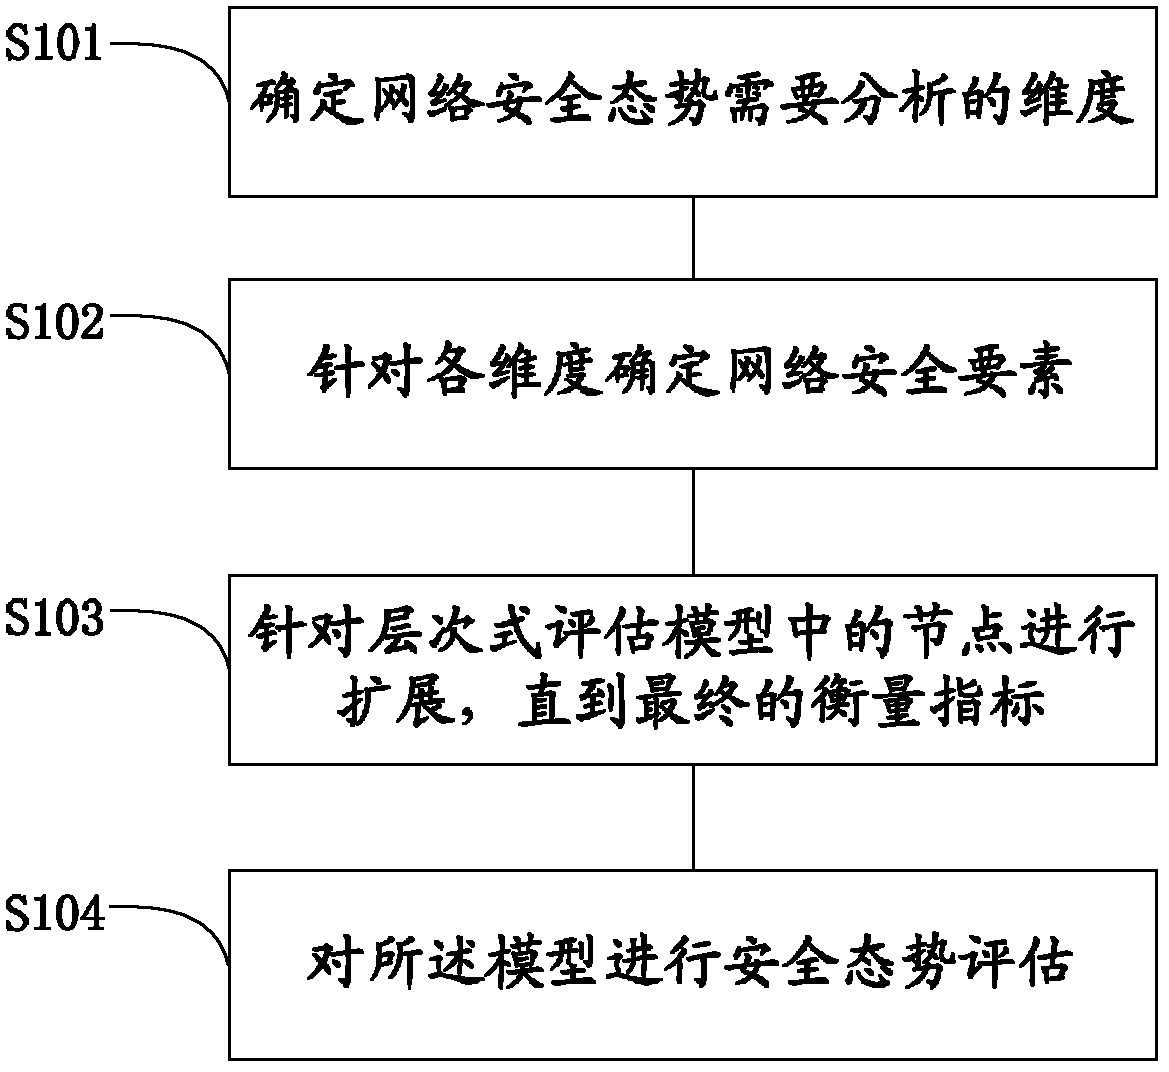 Large-scale network security situation evaluation method based on index system